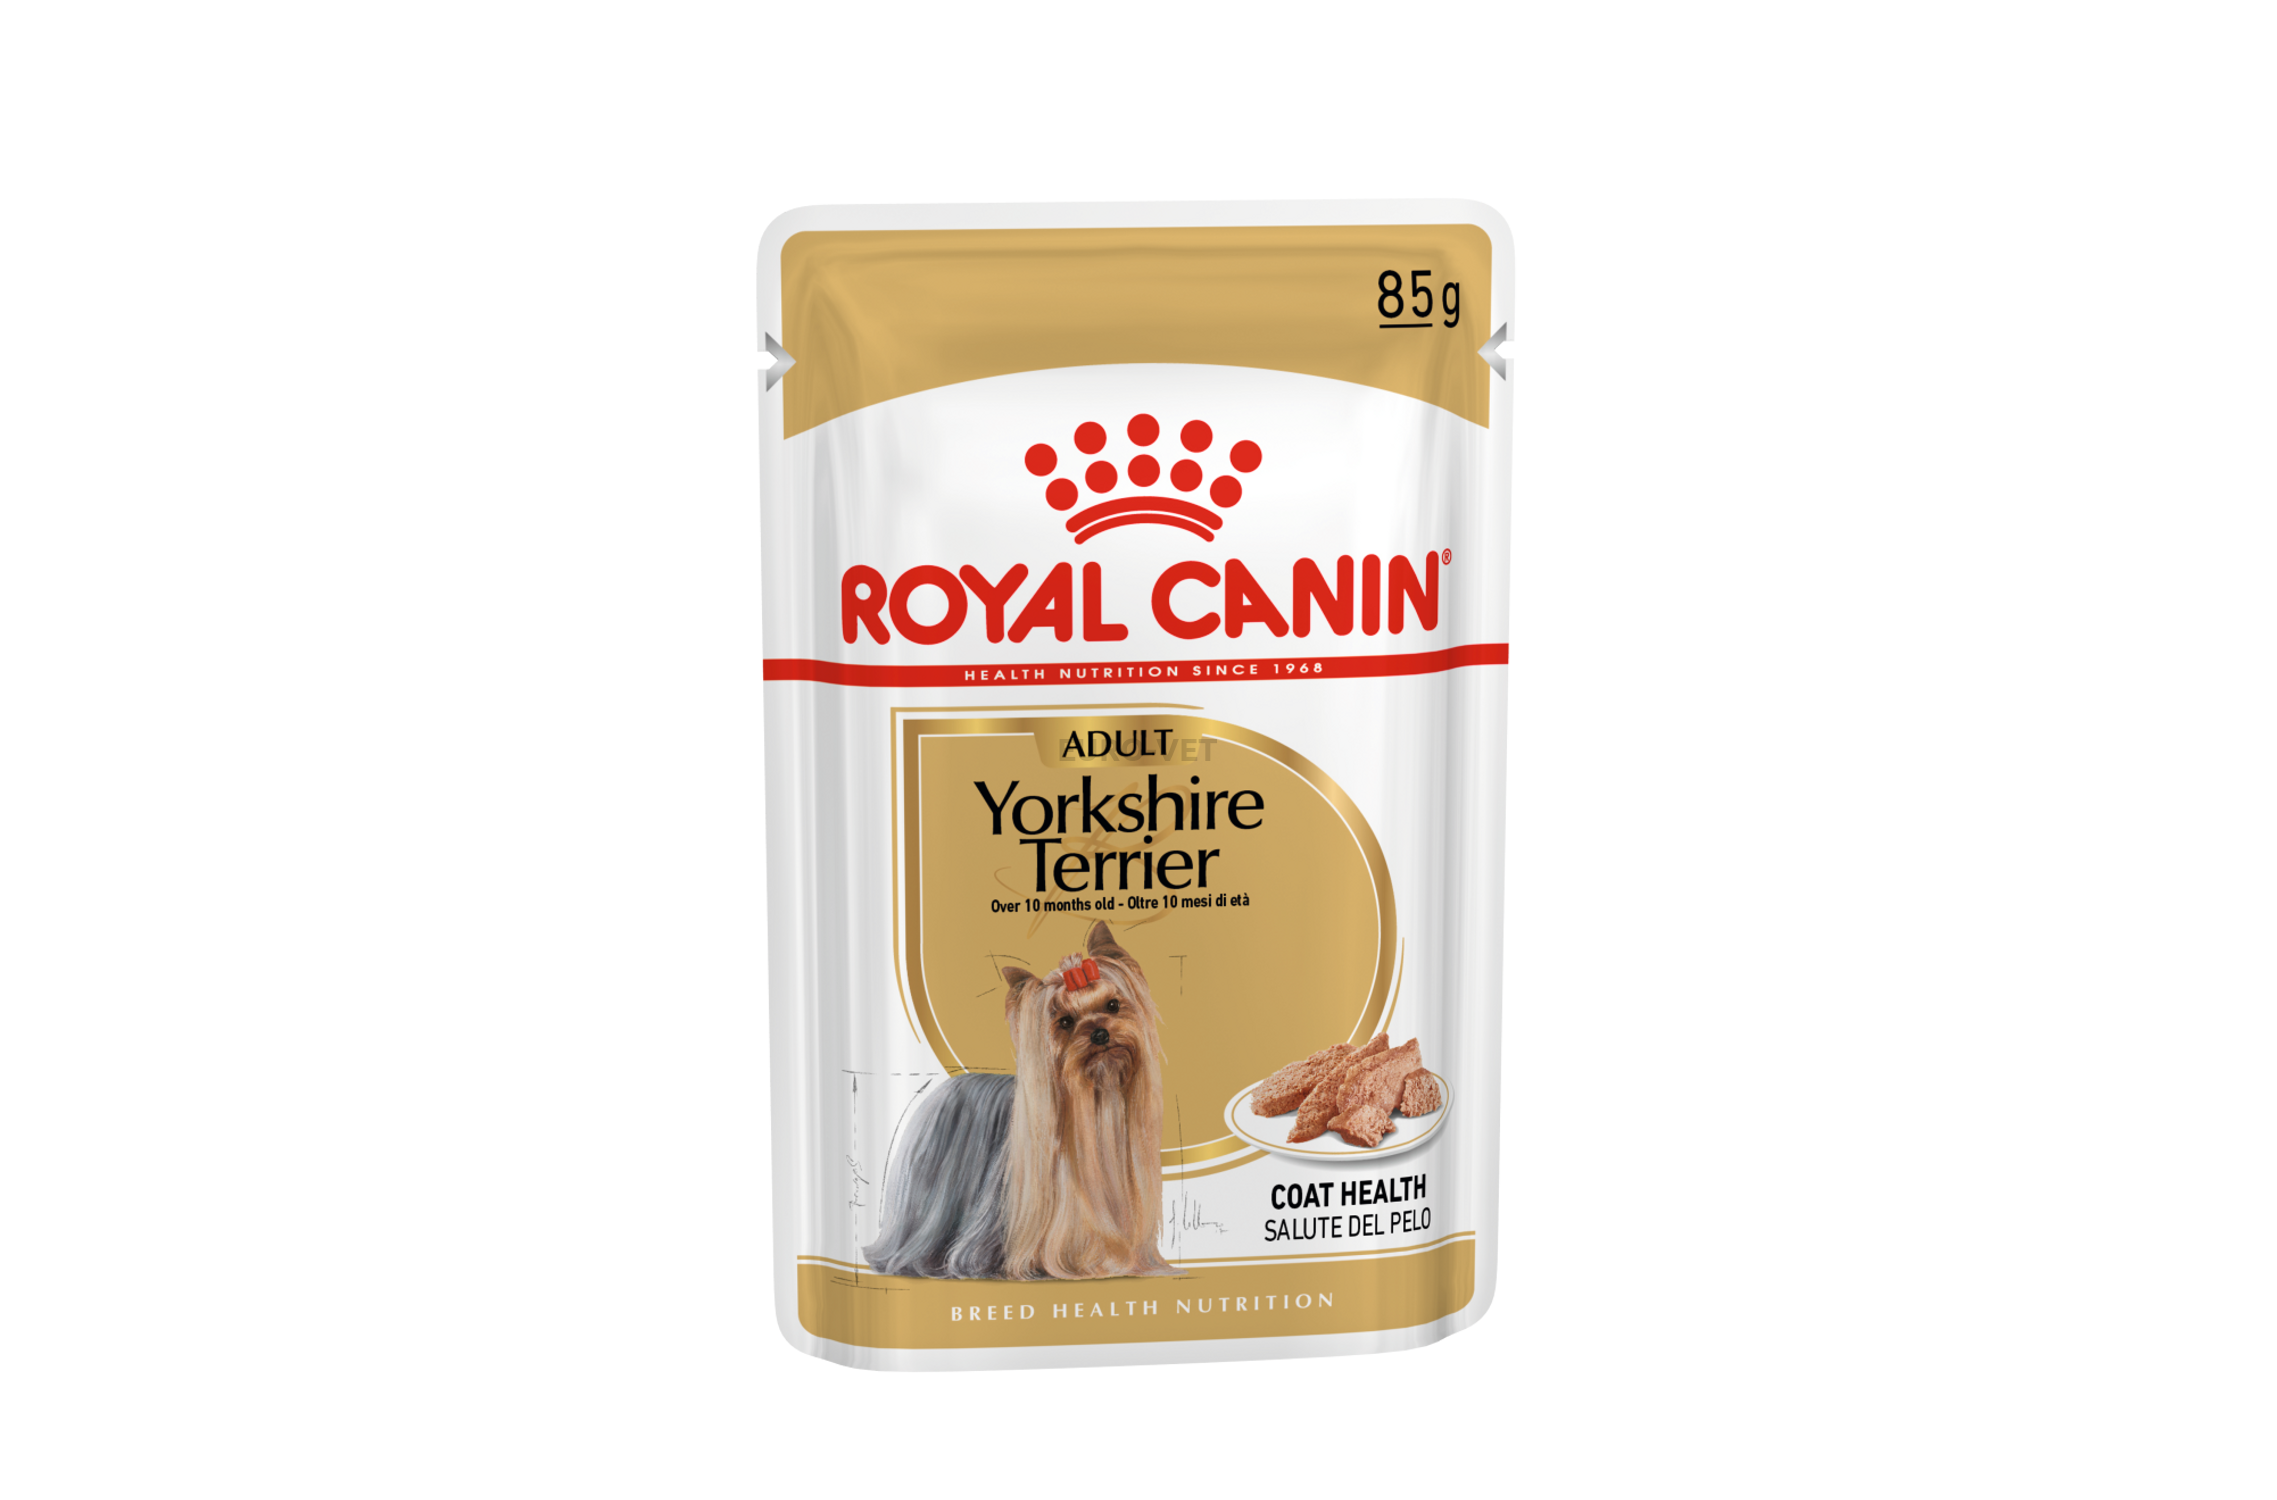 royal canin yorkshire terrier